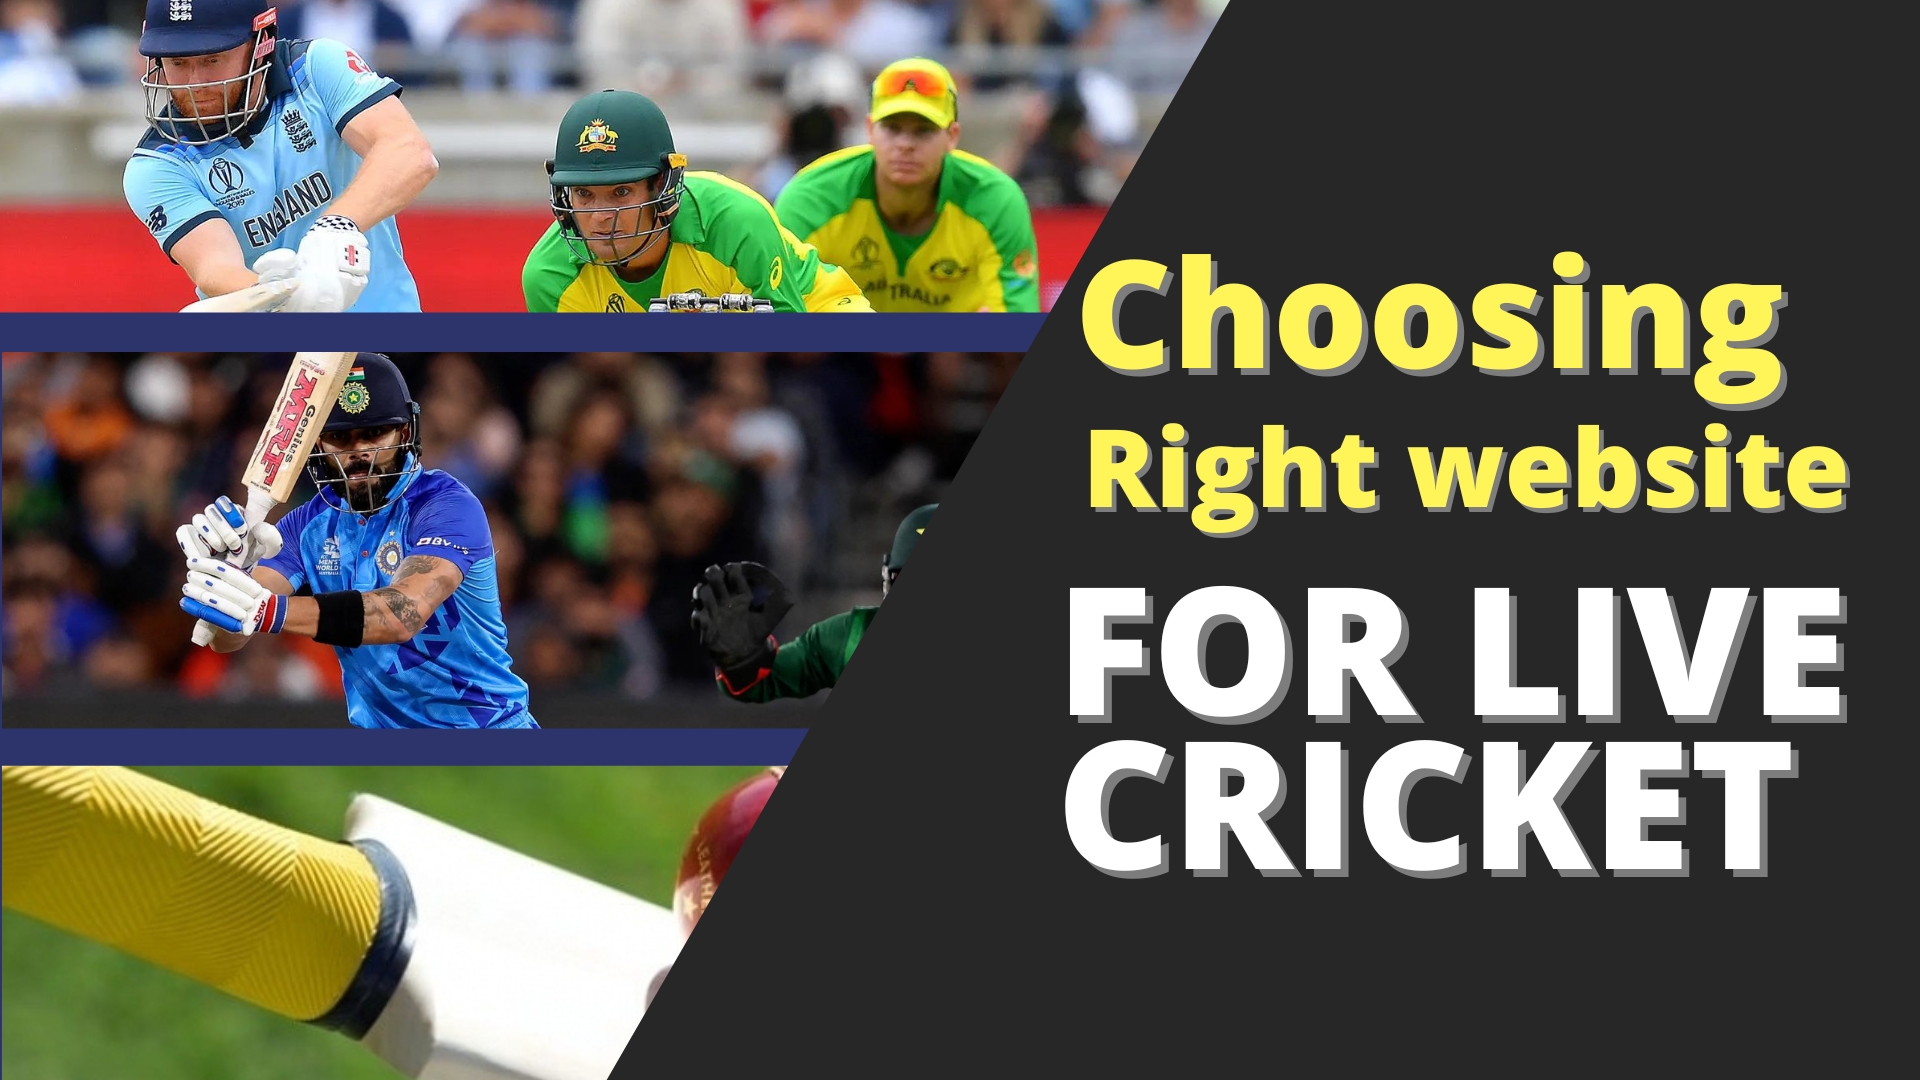 How to Watch Live Cricket Online